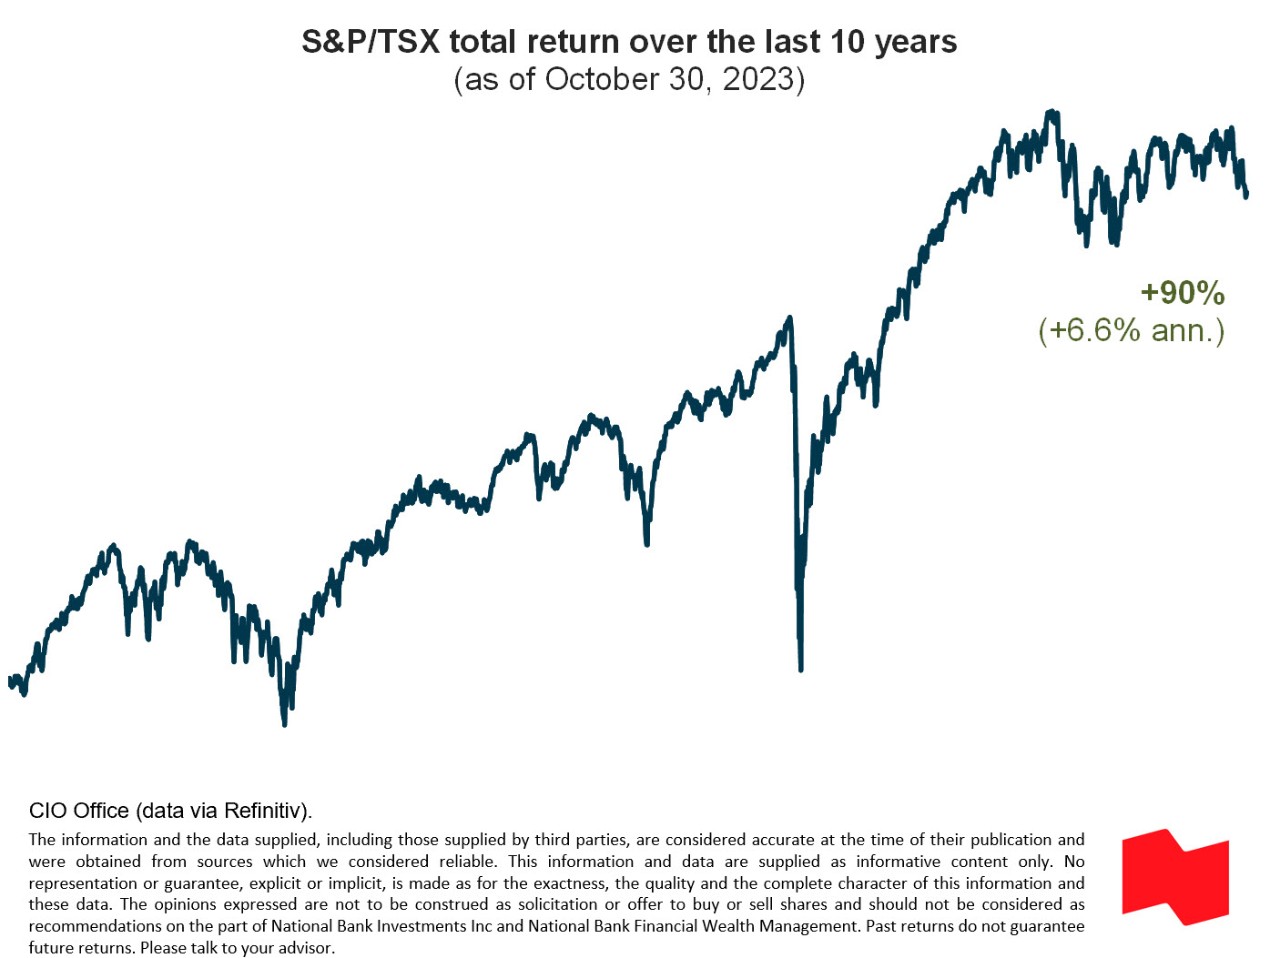 Graph demonstrating S&P/TSX total return over the last 10 years